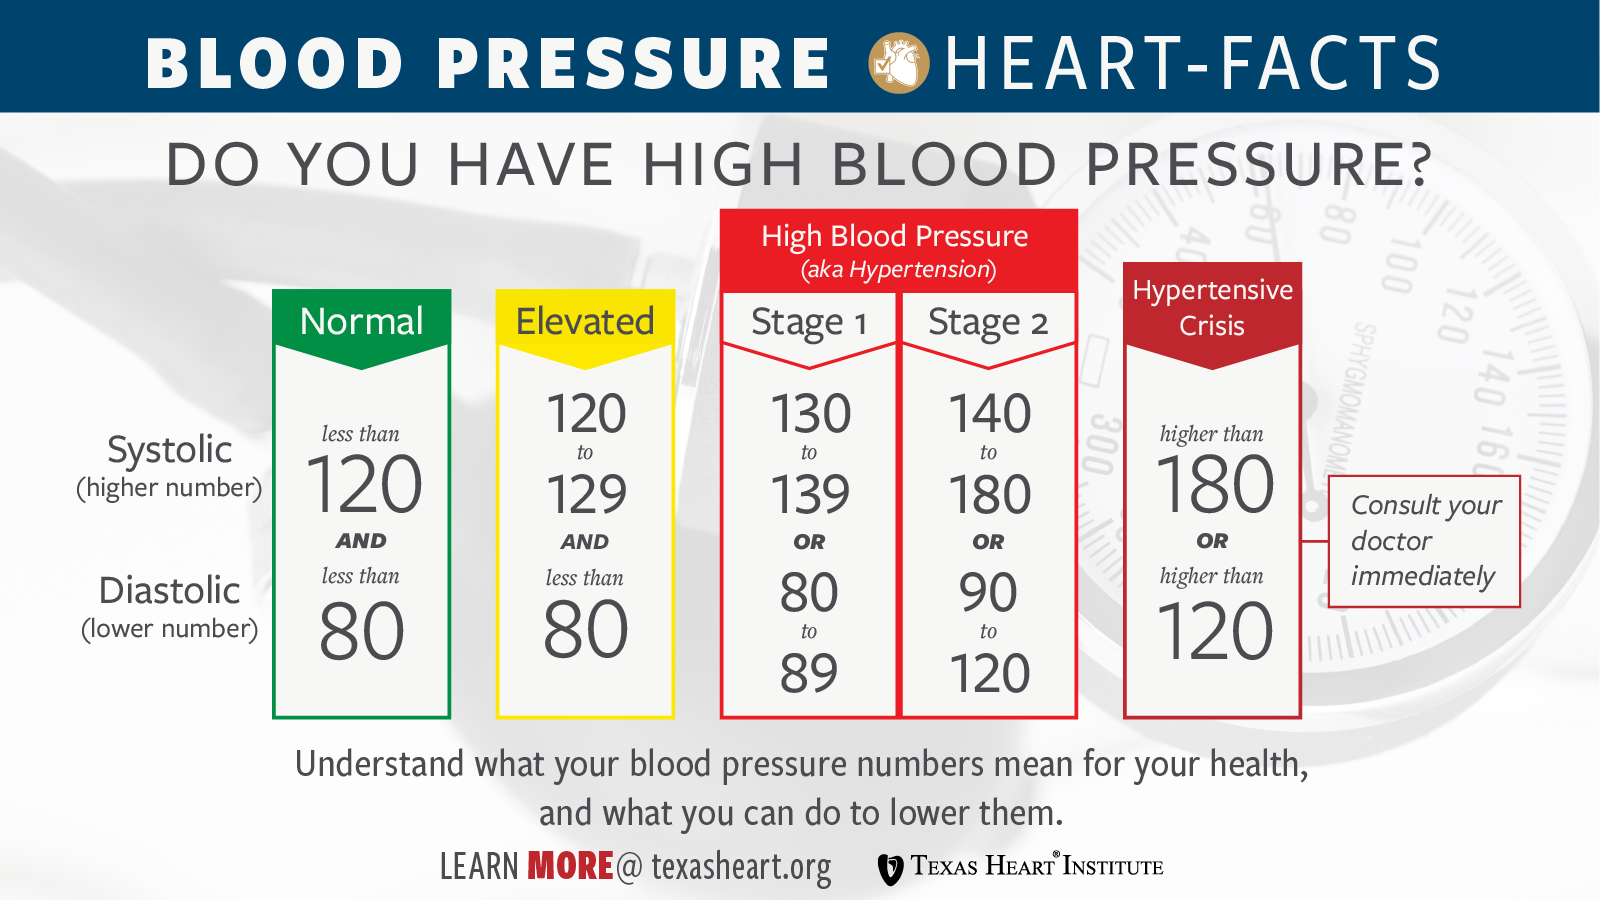 UCLA Health - Adrenal Causes of High Blood Pressure